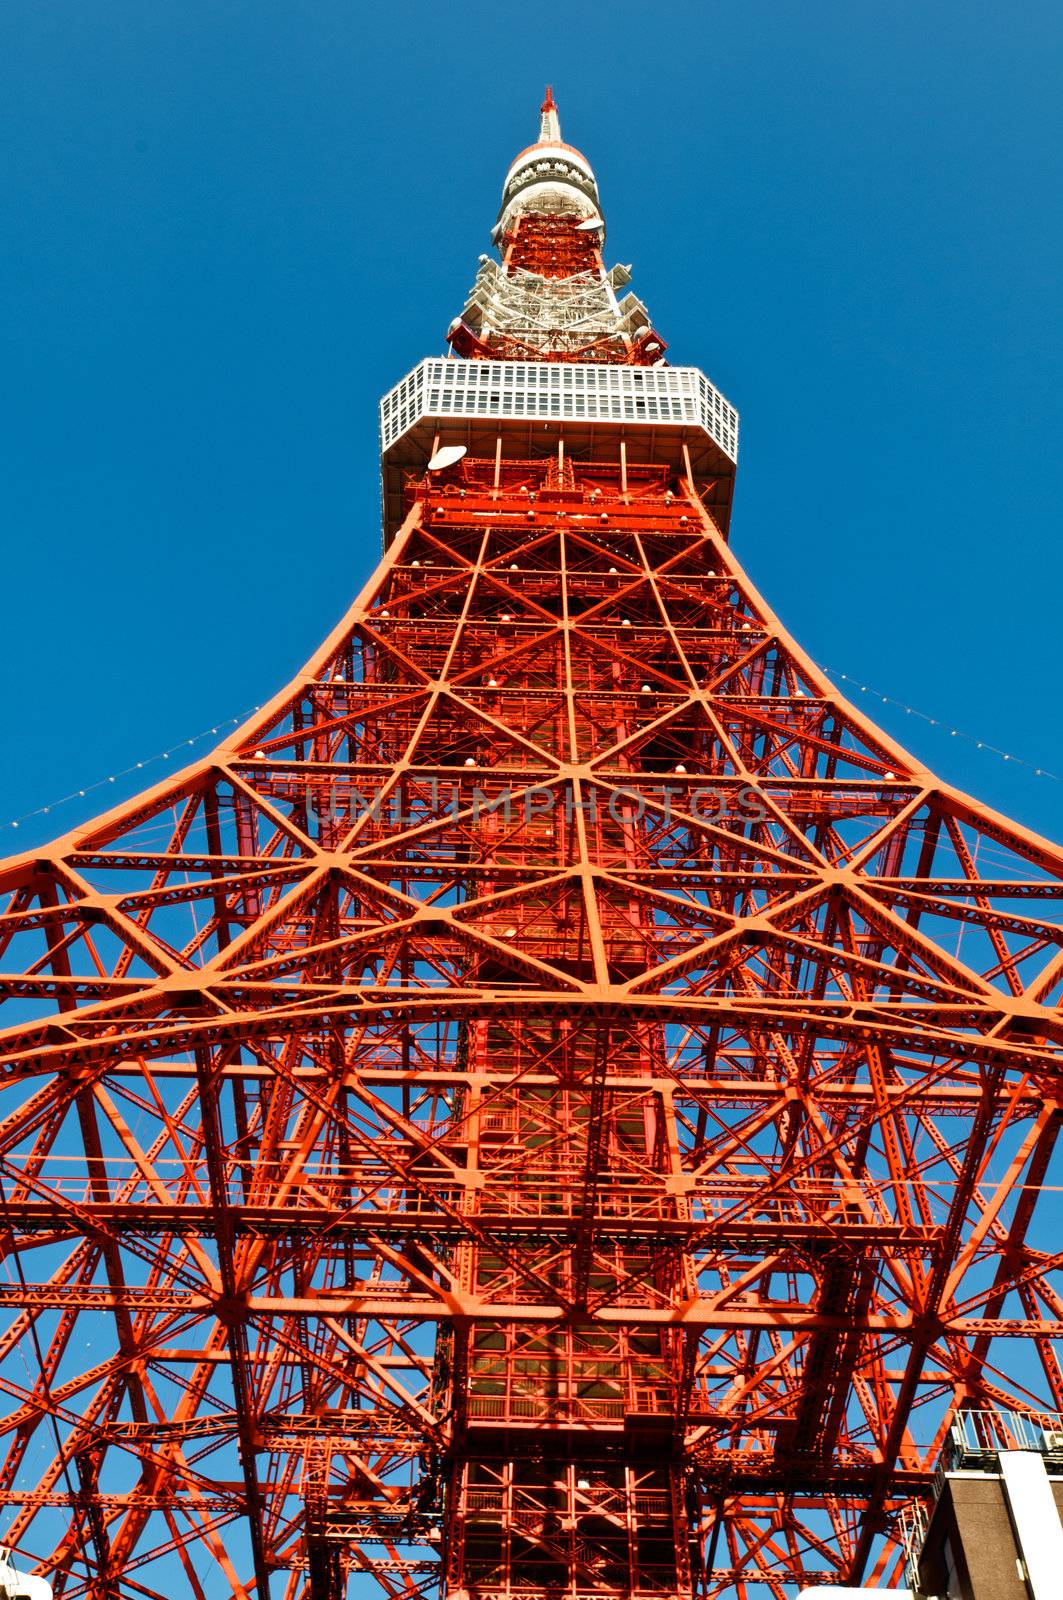 Tokyo tower faces blue sky with no clouds